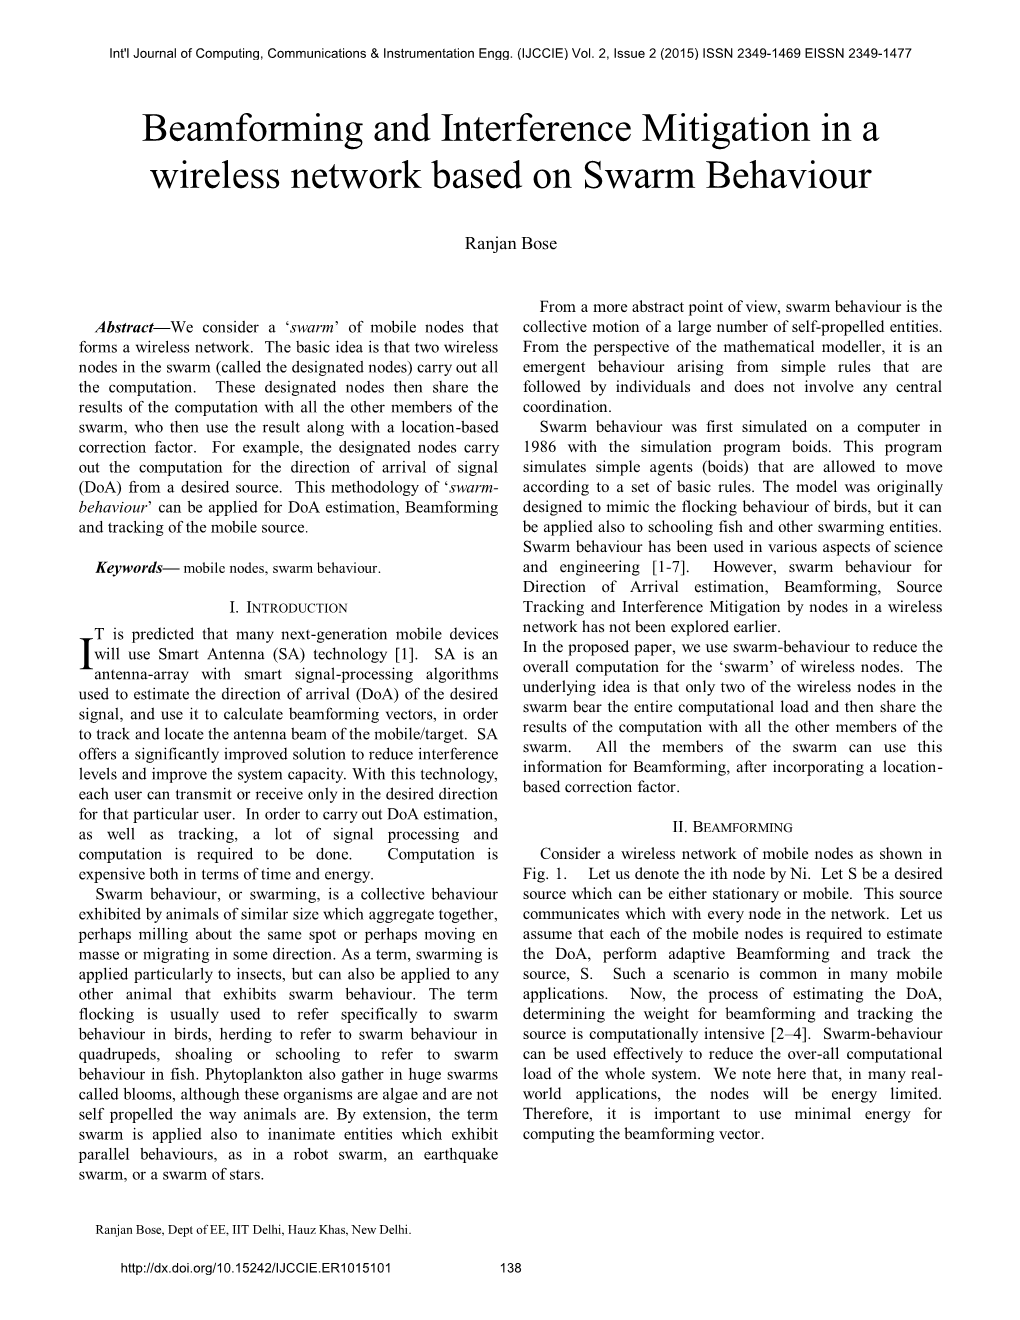 Beamforming and Interference Mitigation in a Wireless Network Based on Swarm Behaviour